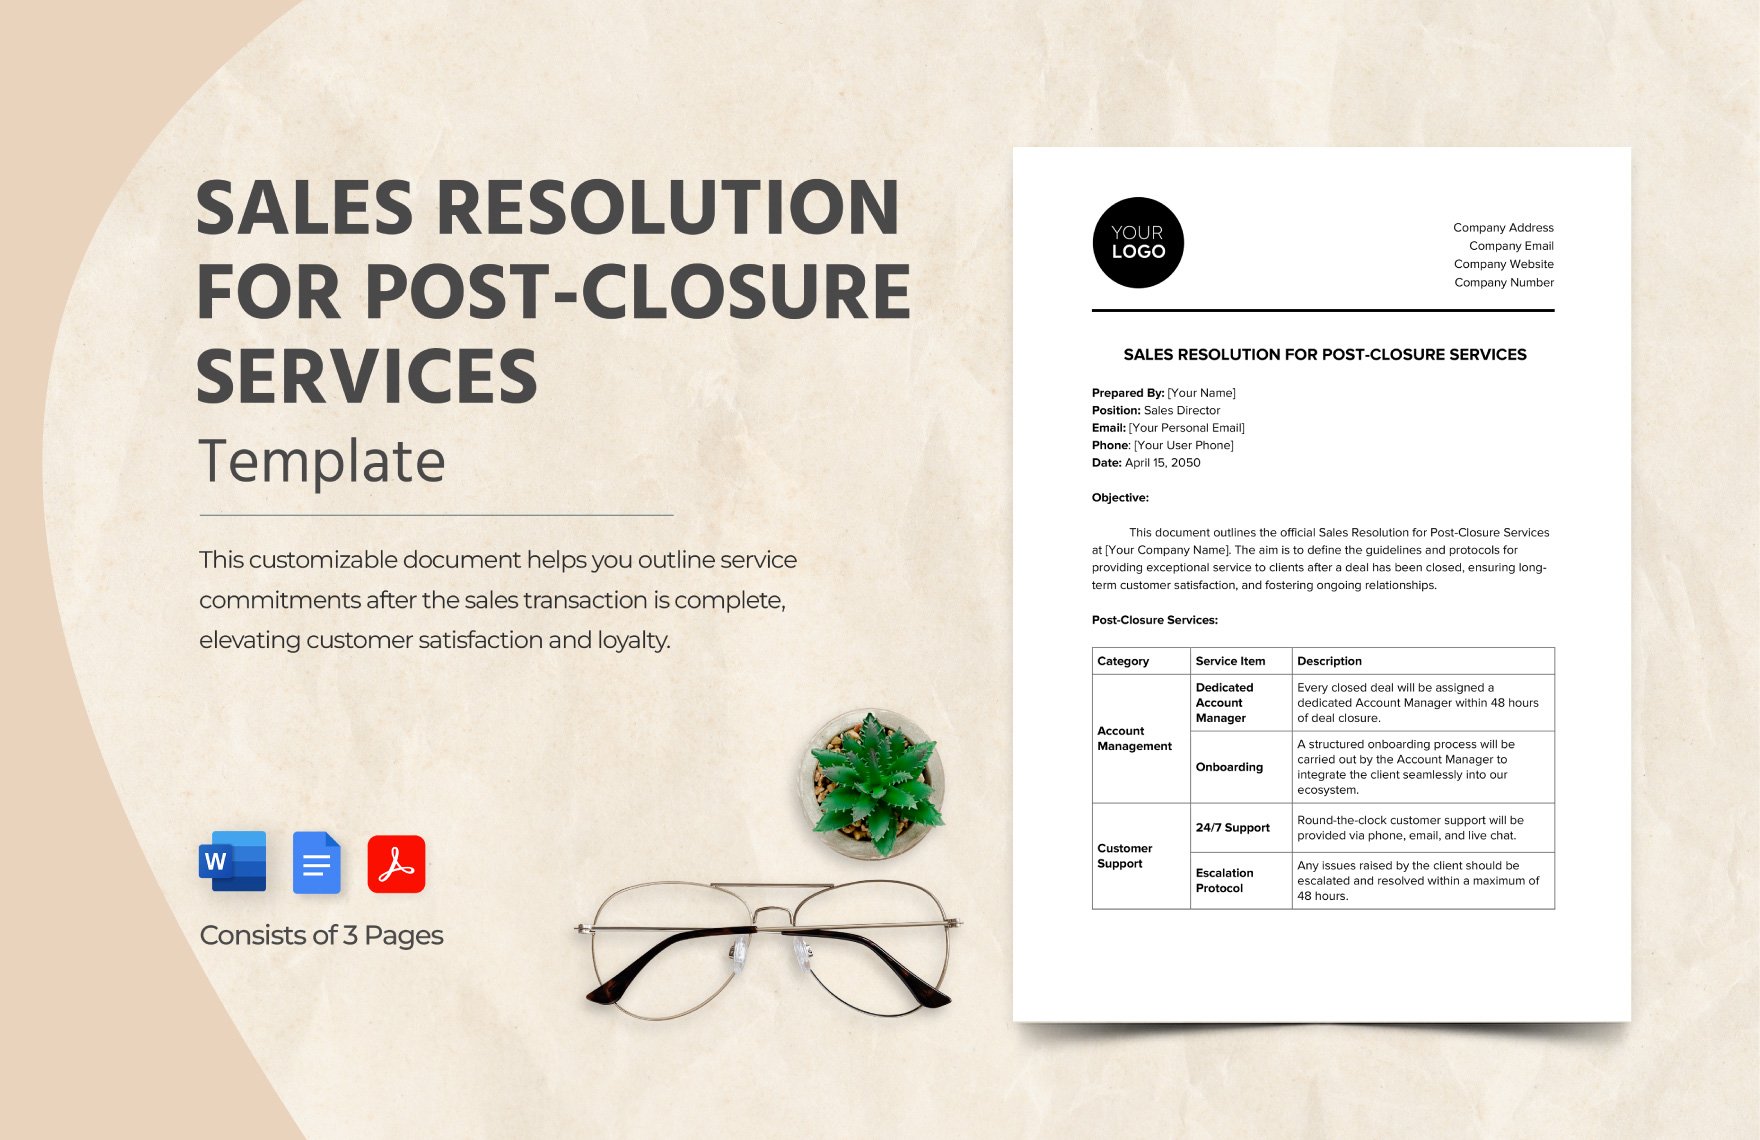 Sales Resolution for Post-Closure Services Template